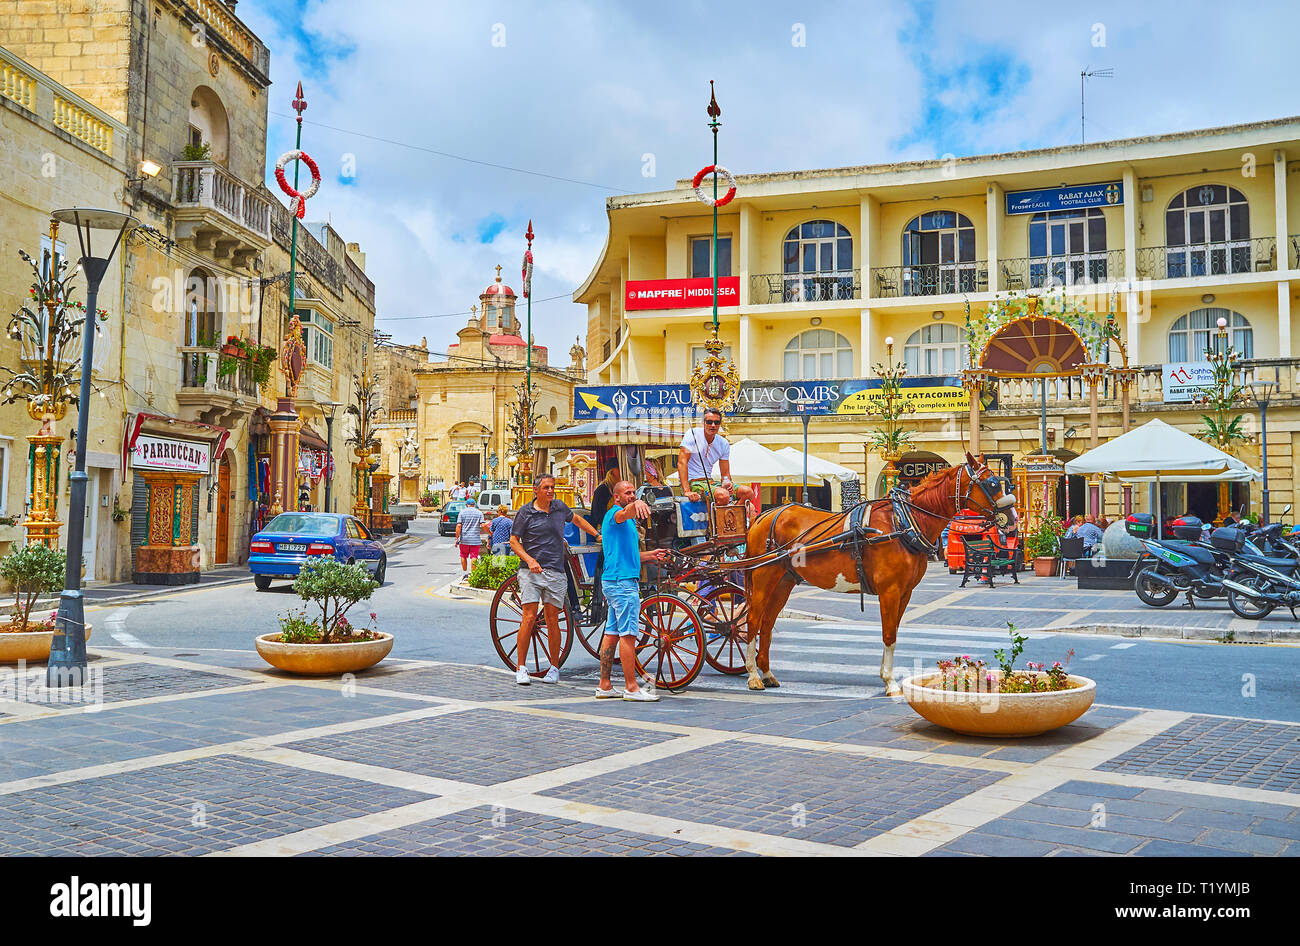 RABAT, MALTA - JUNE 16, 2018: The horse-drawn carriage is the best tourist transport to explore medieval city with its numerous landmarks, on June 16  Stock Photo